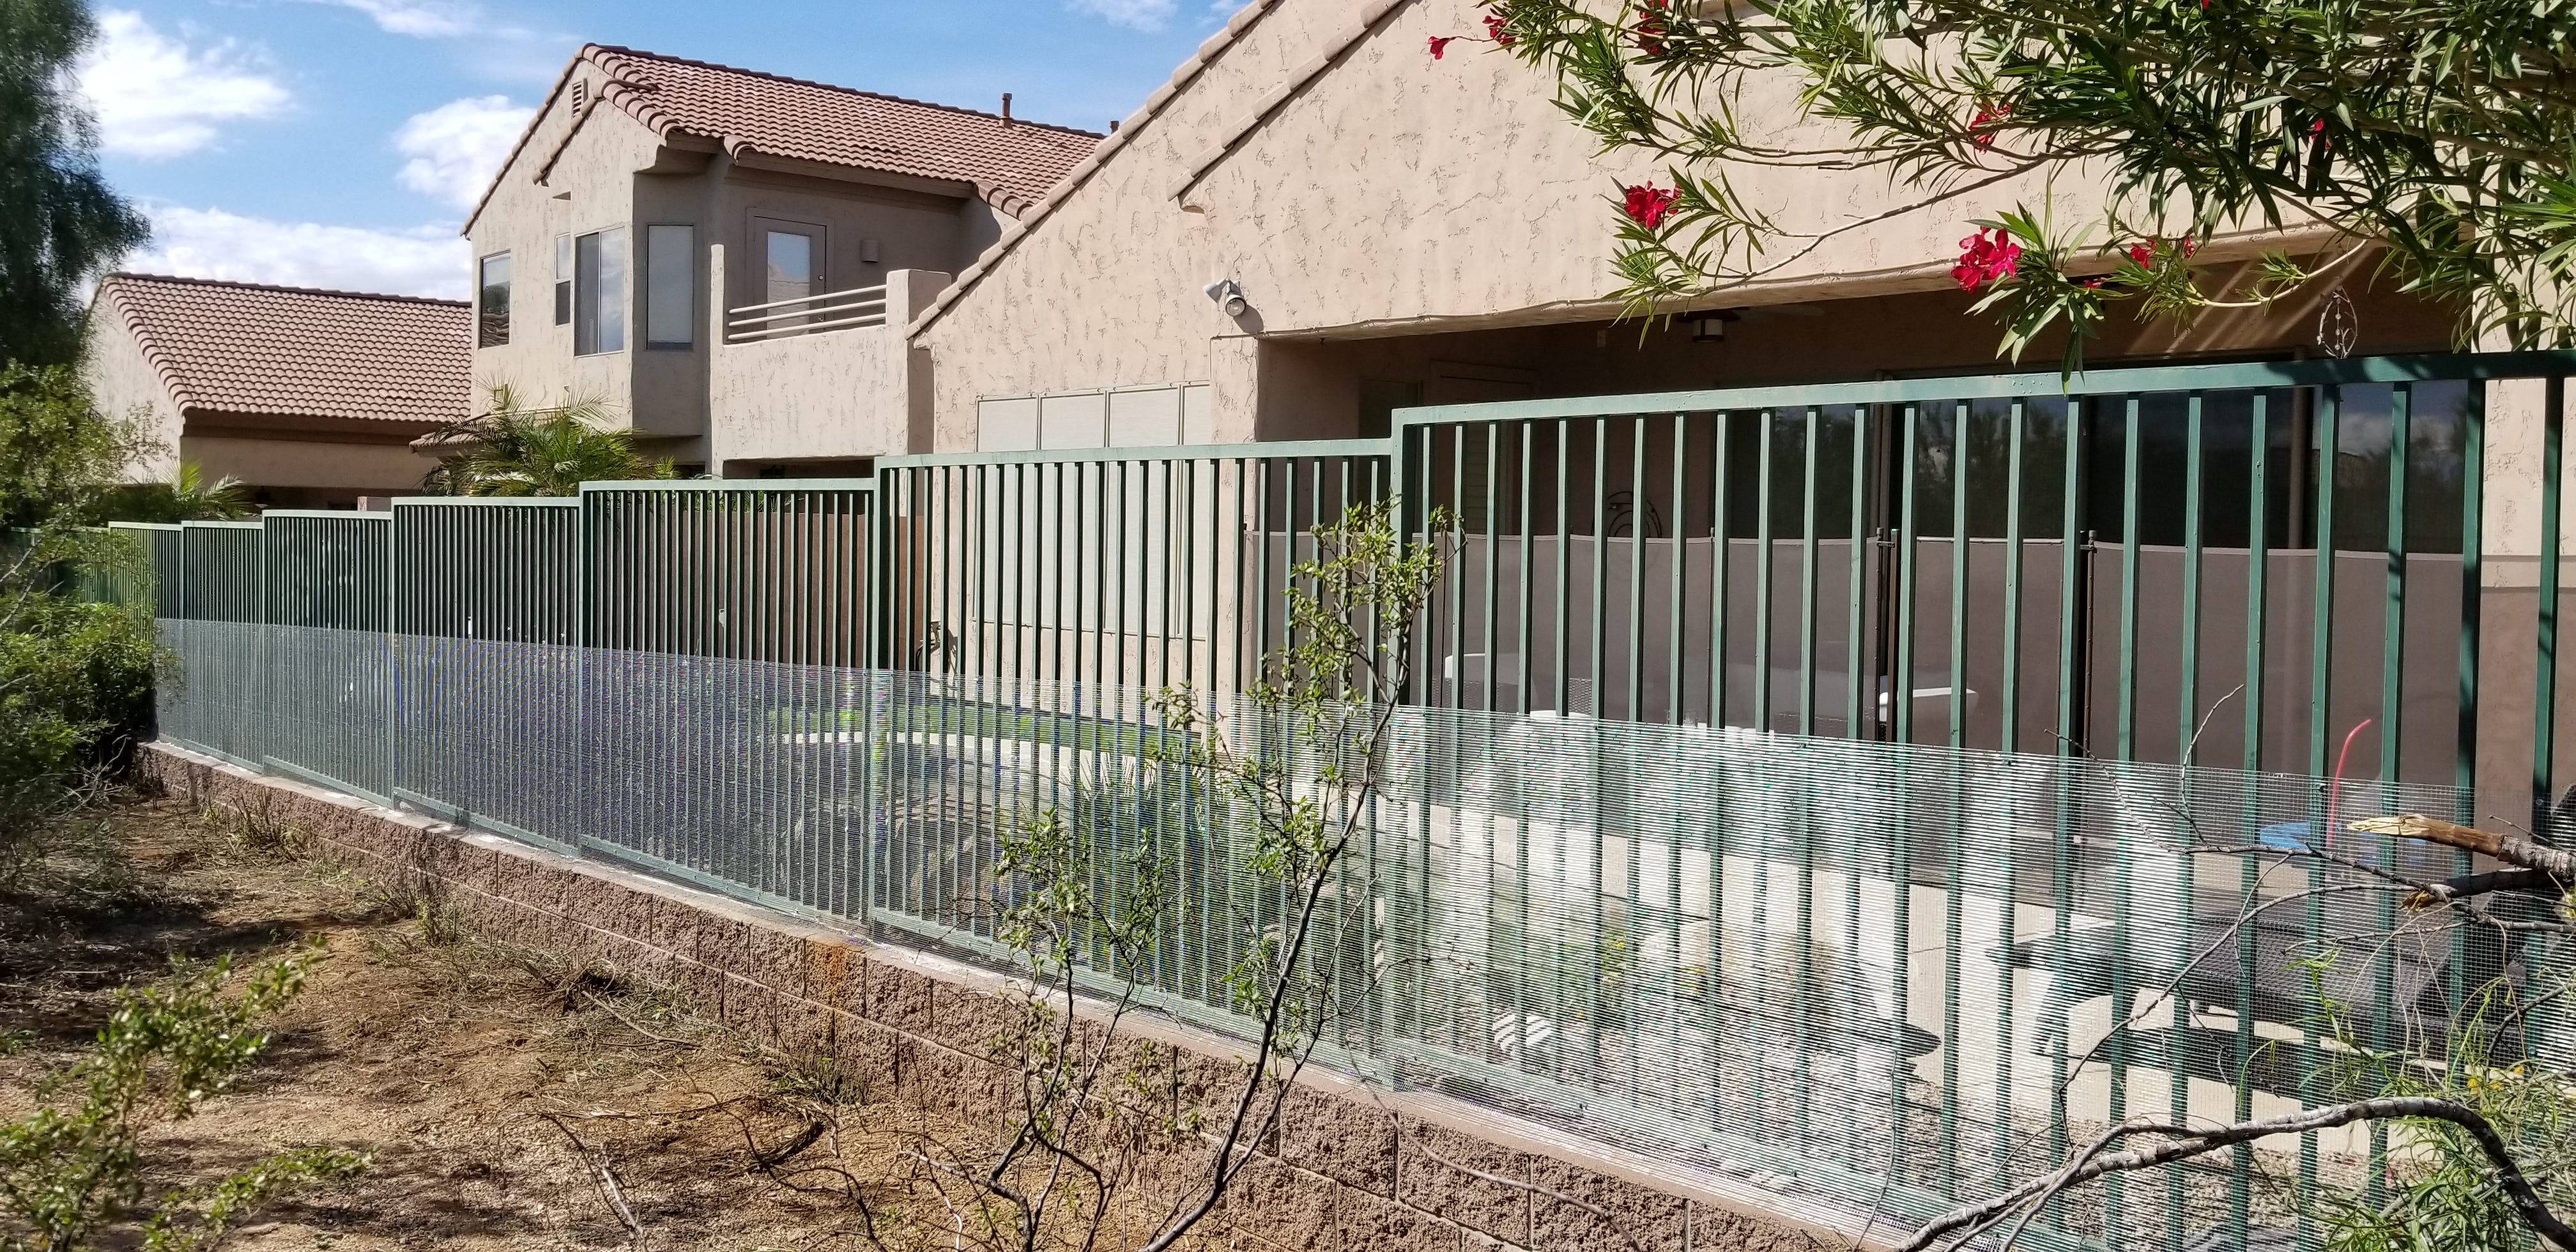 10 Important Things To Look For In A Rattlesnake Fence Provider The Definitive Buyer S Guide To Snake Fencing By Bryan D Hughes Medium